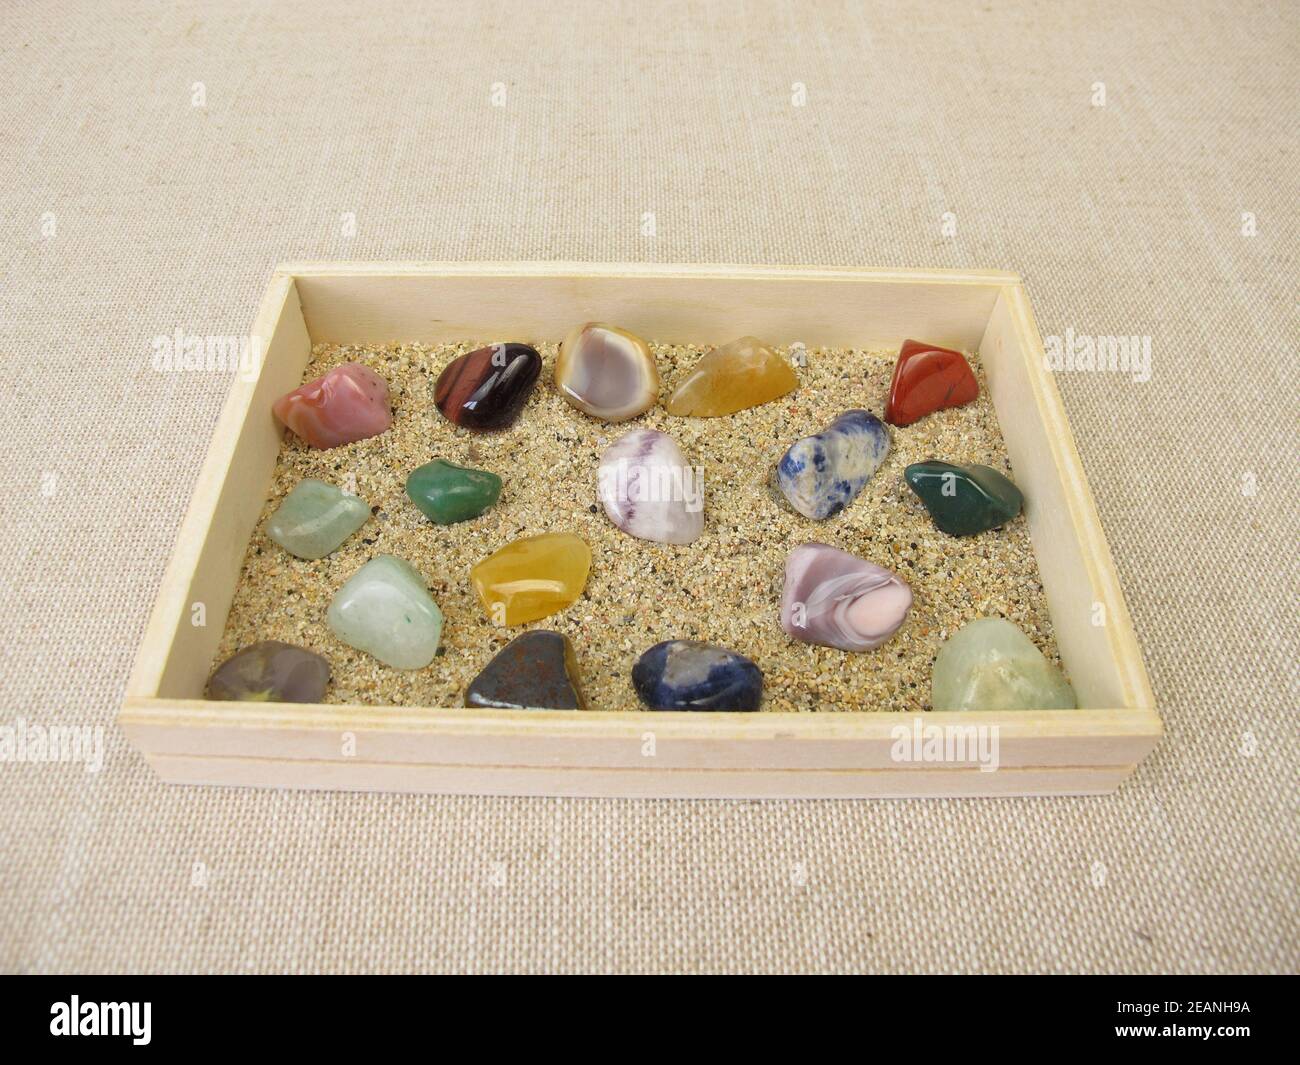 Tumbled gemstones in a wooden box with sand Stock Photo